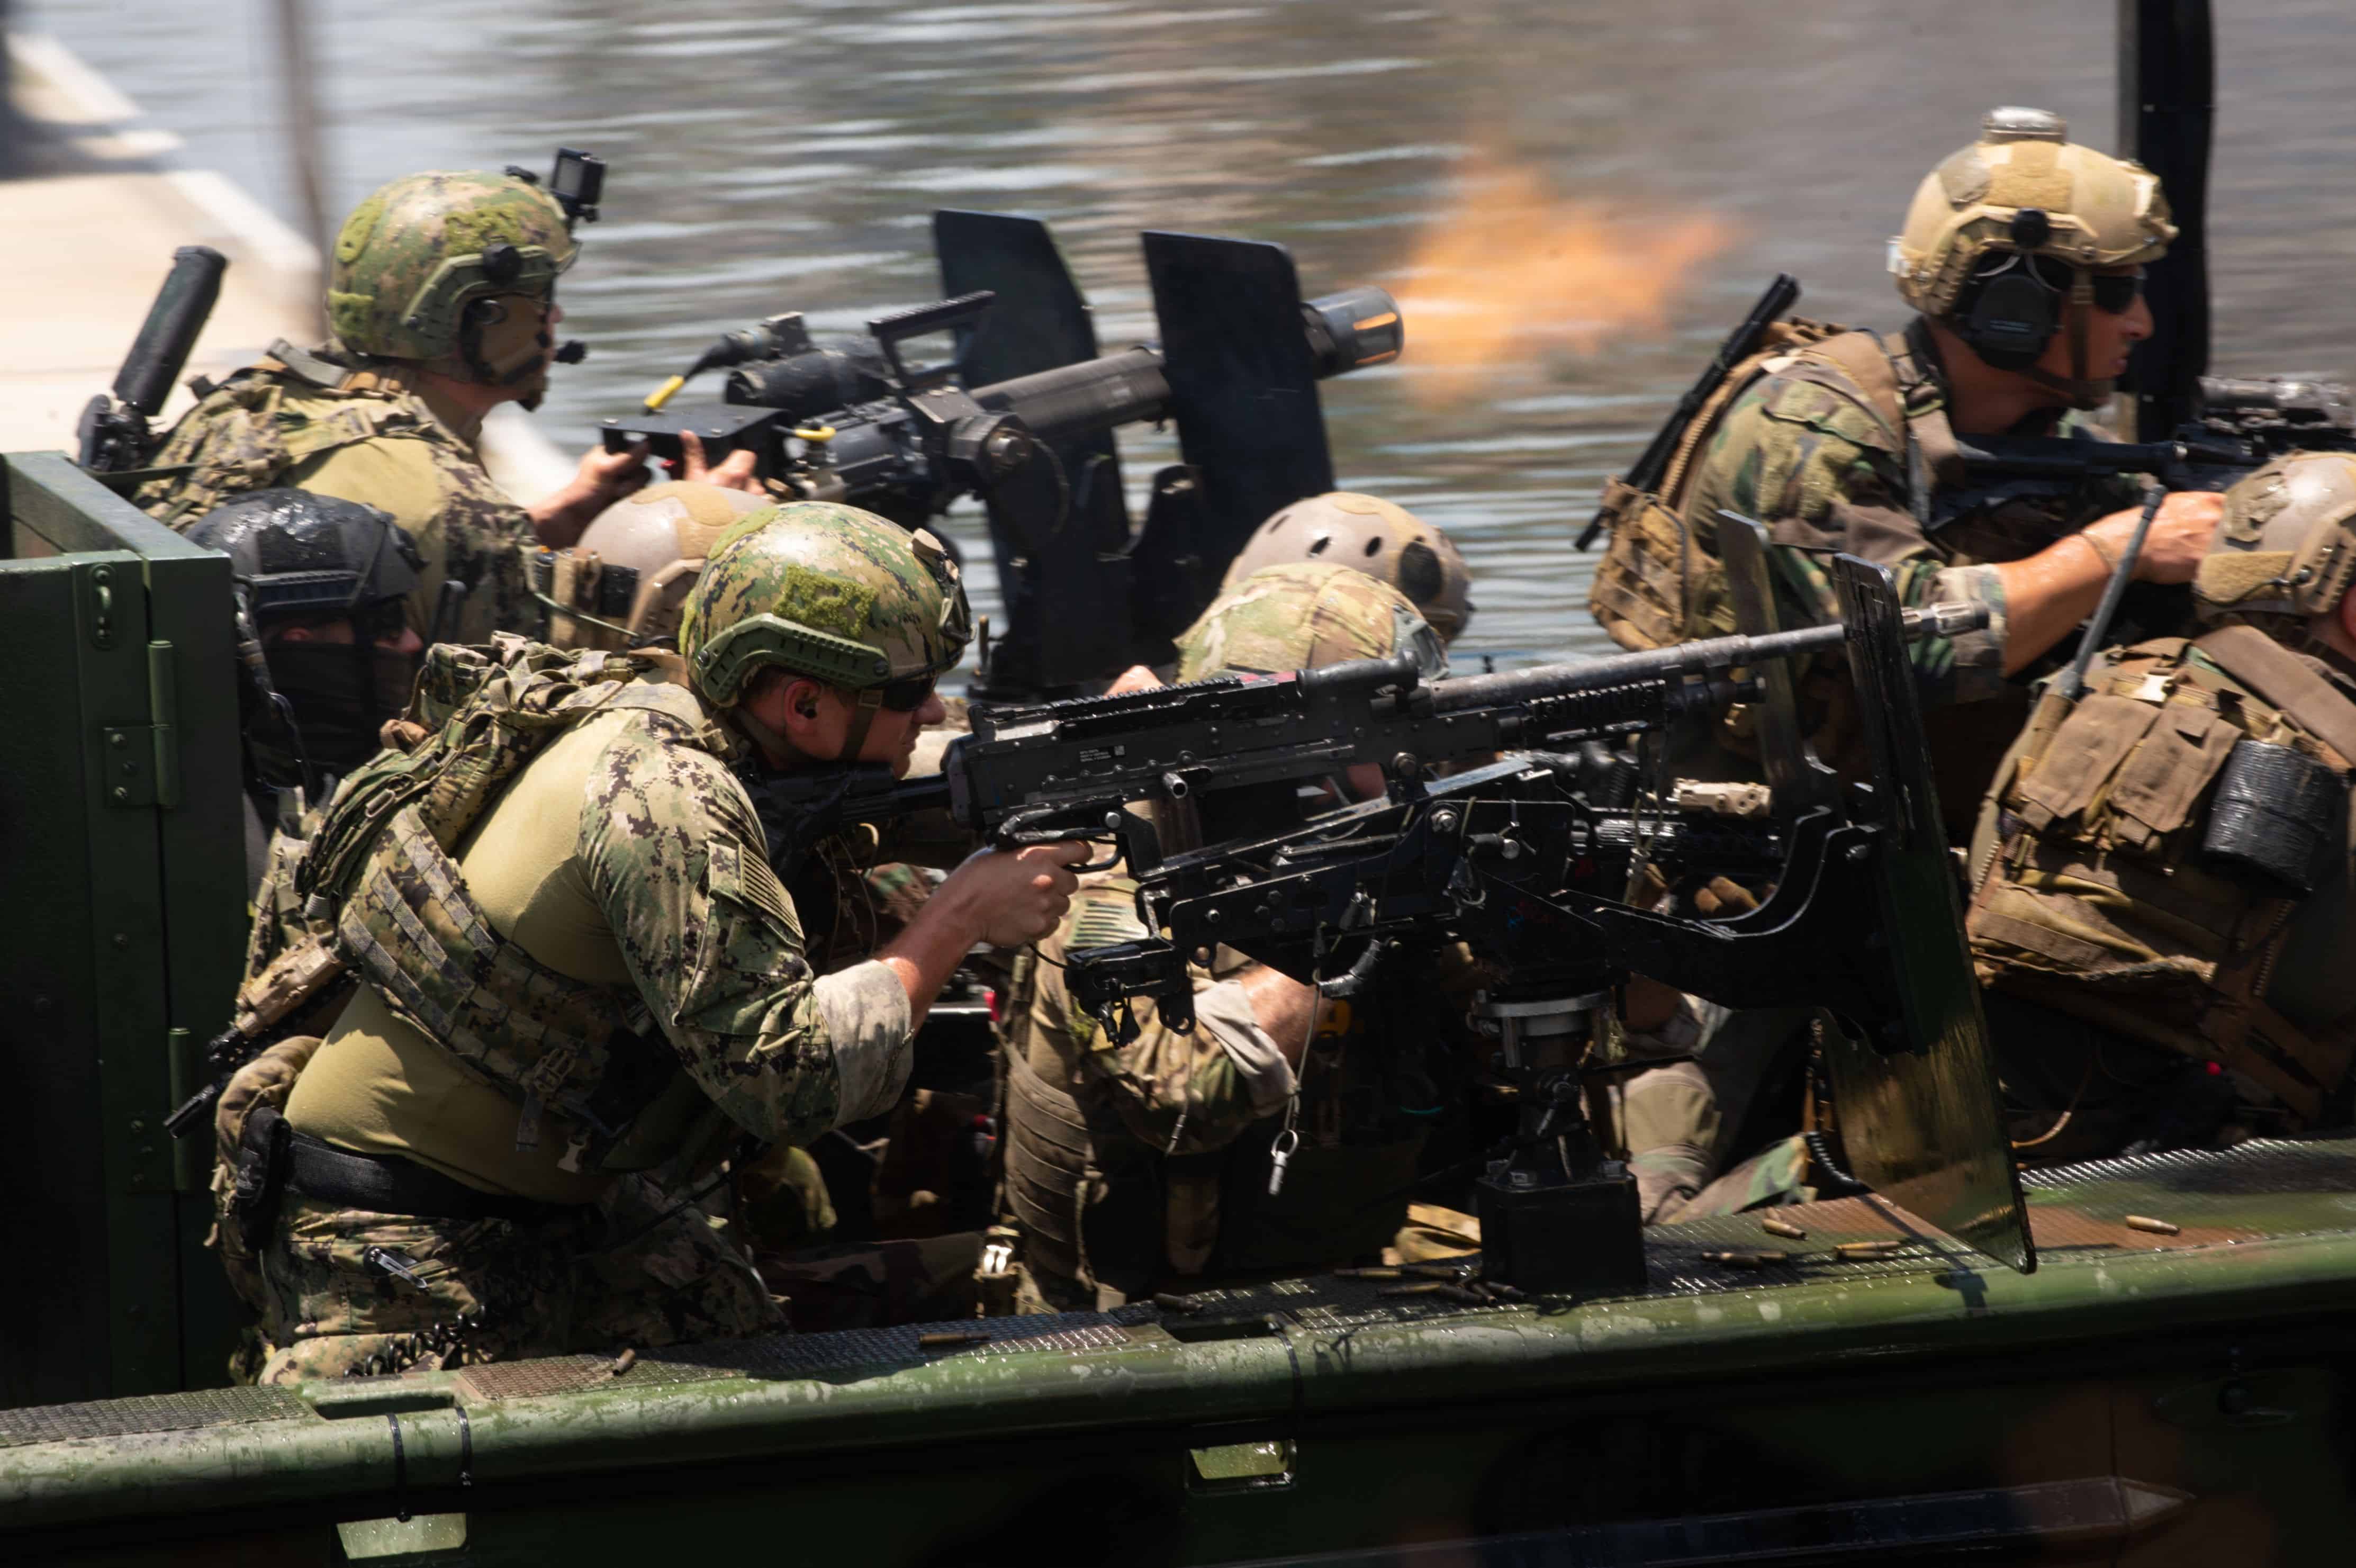 Multinational Special Operations Forces conduct an amphibious assault from a Special Operations Craft – Riverine boat during a capabilities demonstration as part of the 2018 International Special Operations Forces week in downtown Tampa, Fla., May 23, 2018. ISOF is the premier conference for the SOF community to advance the understanding of international SOF challenges. (Photo by U.S. Air Force Master Sgt. Barry Loo)